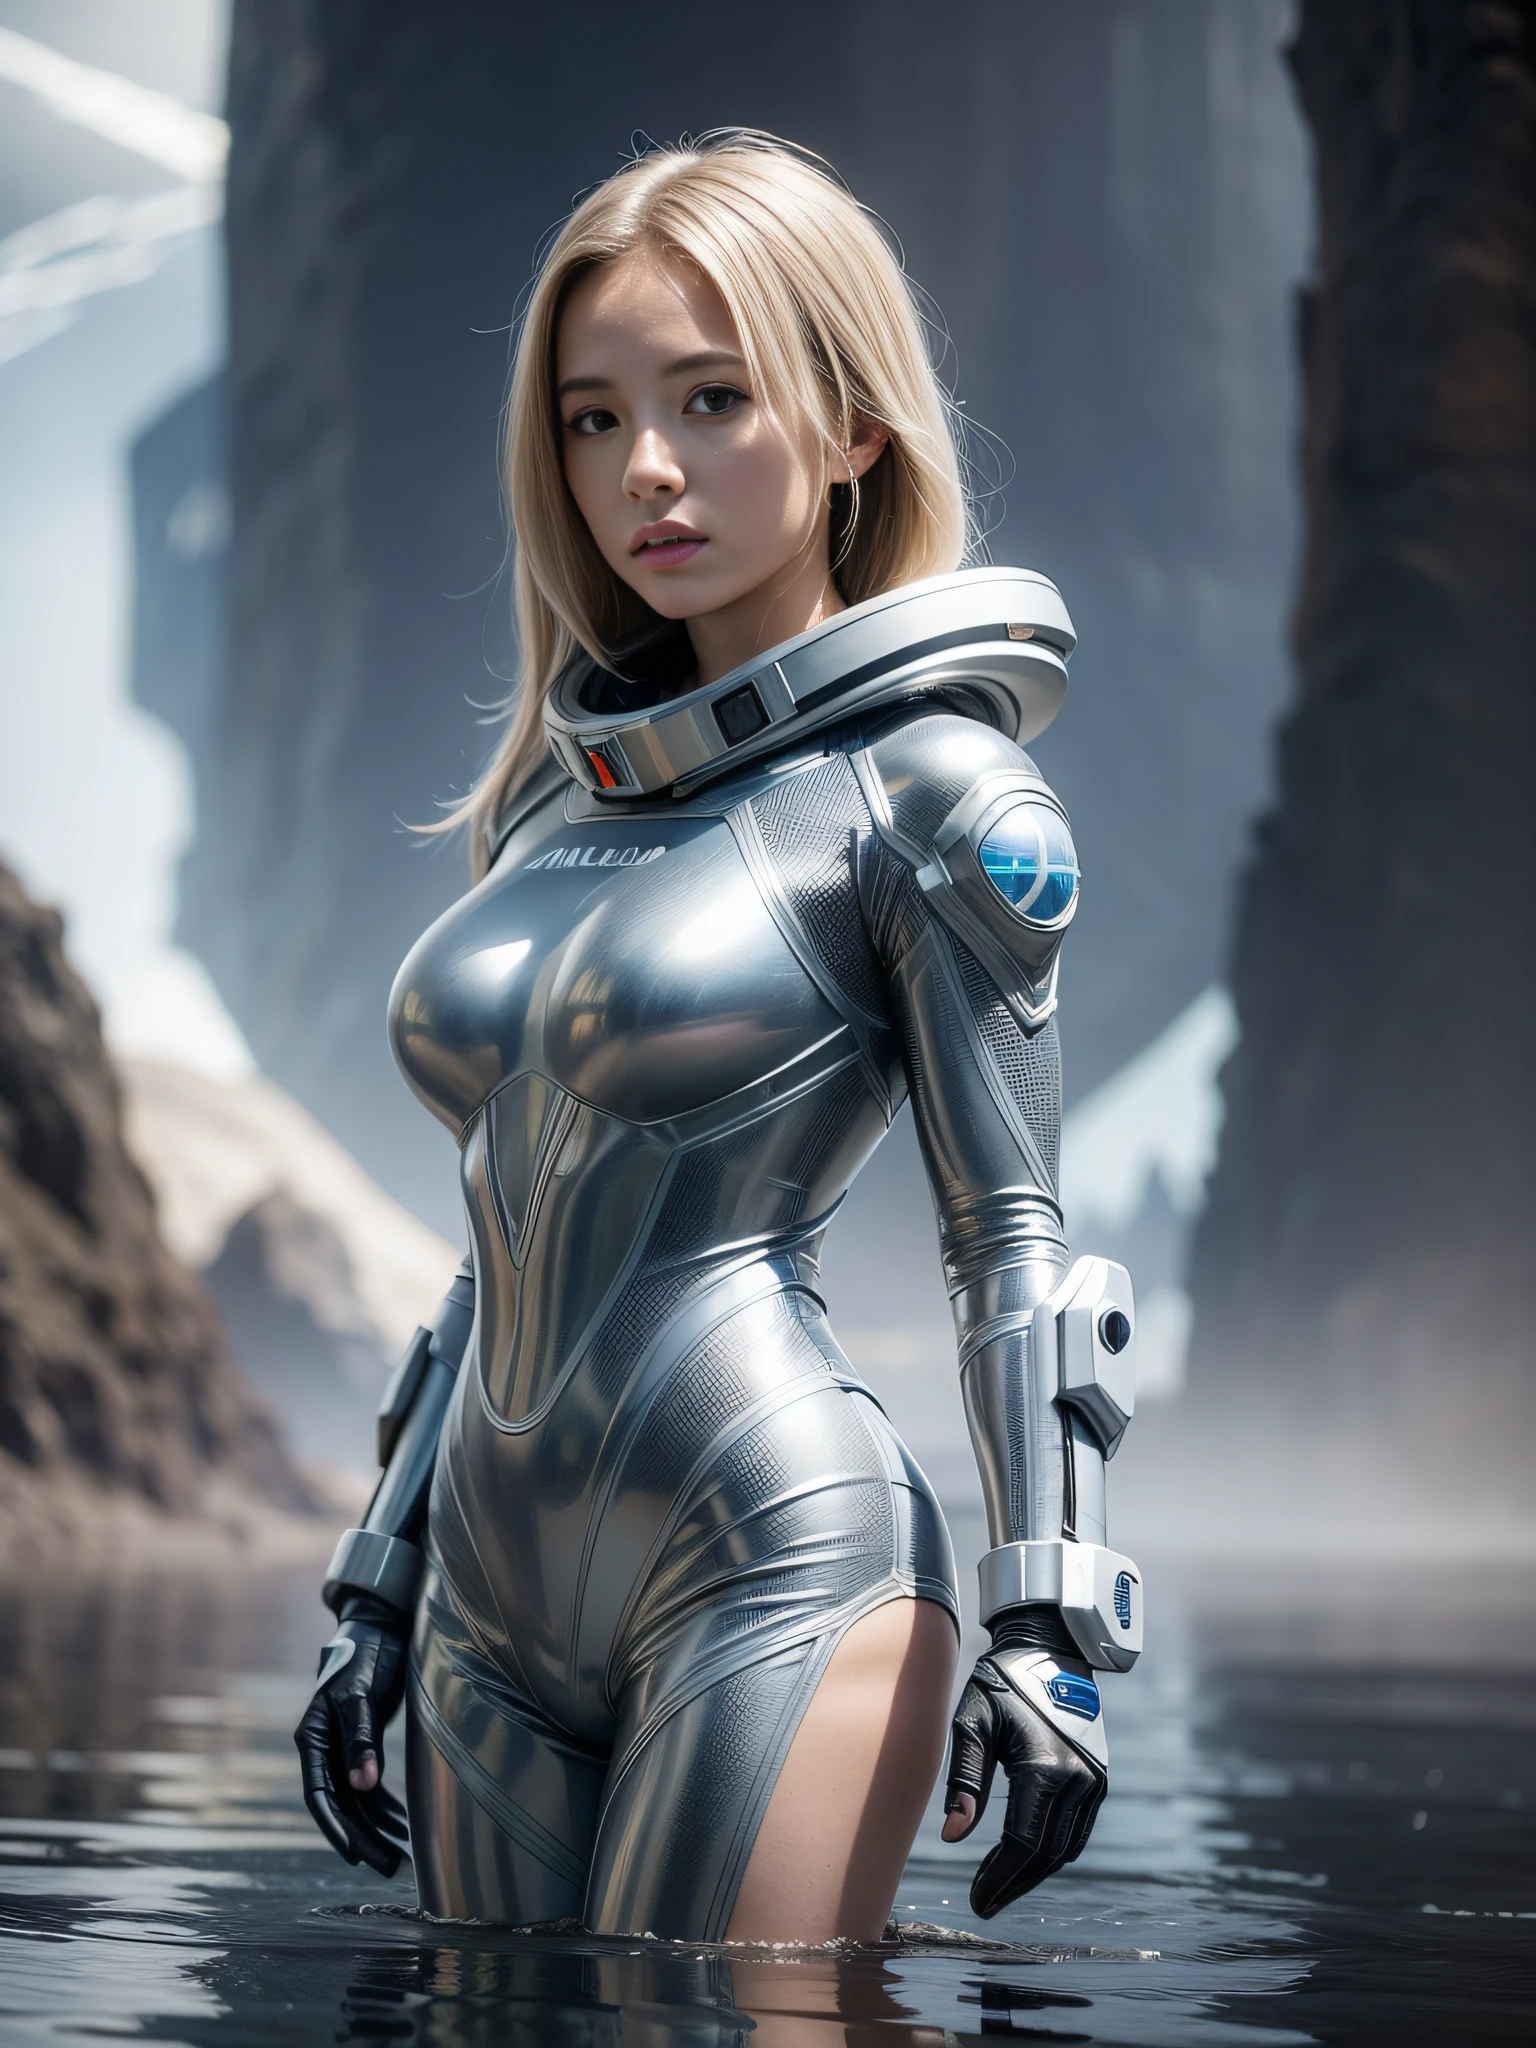 A beautiful girl, wearing a silver spacesuit, standing on an endless surface of water, floating mist, holding a large ion gun in both hands, mountains in the background, no frontal fill light, dark light, rich in detail Inspired by the movie Alien prequel Prometheus